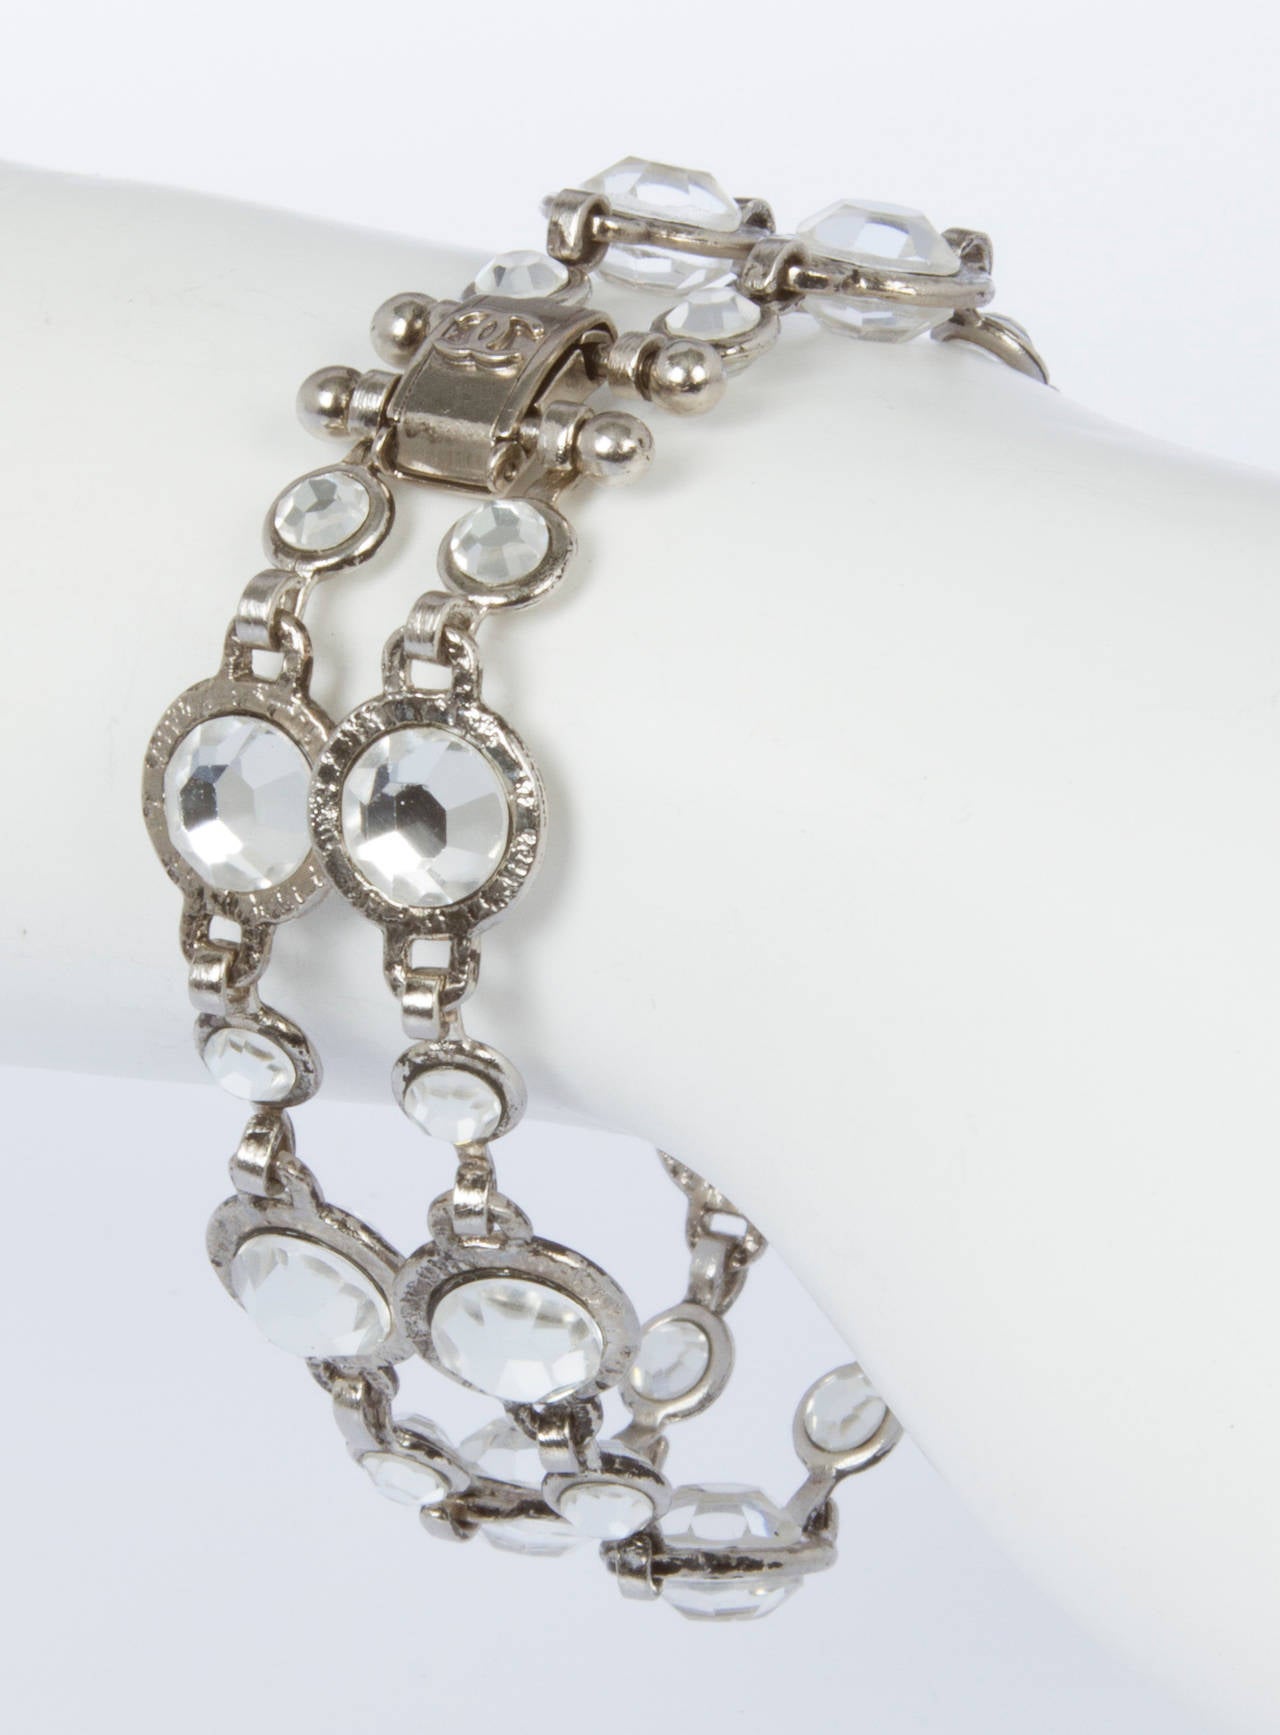 This is a simple elegant bracelet, the crystals are set in a platinum plated meta, from the 1998 Spring collection.